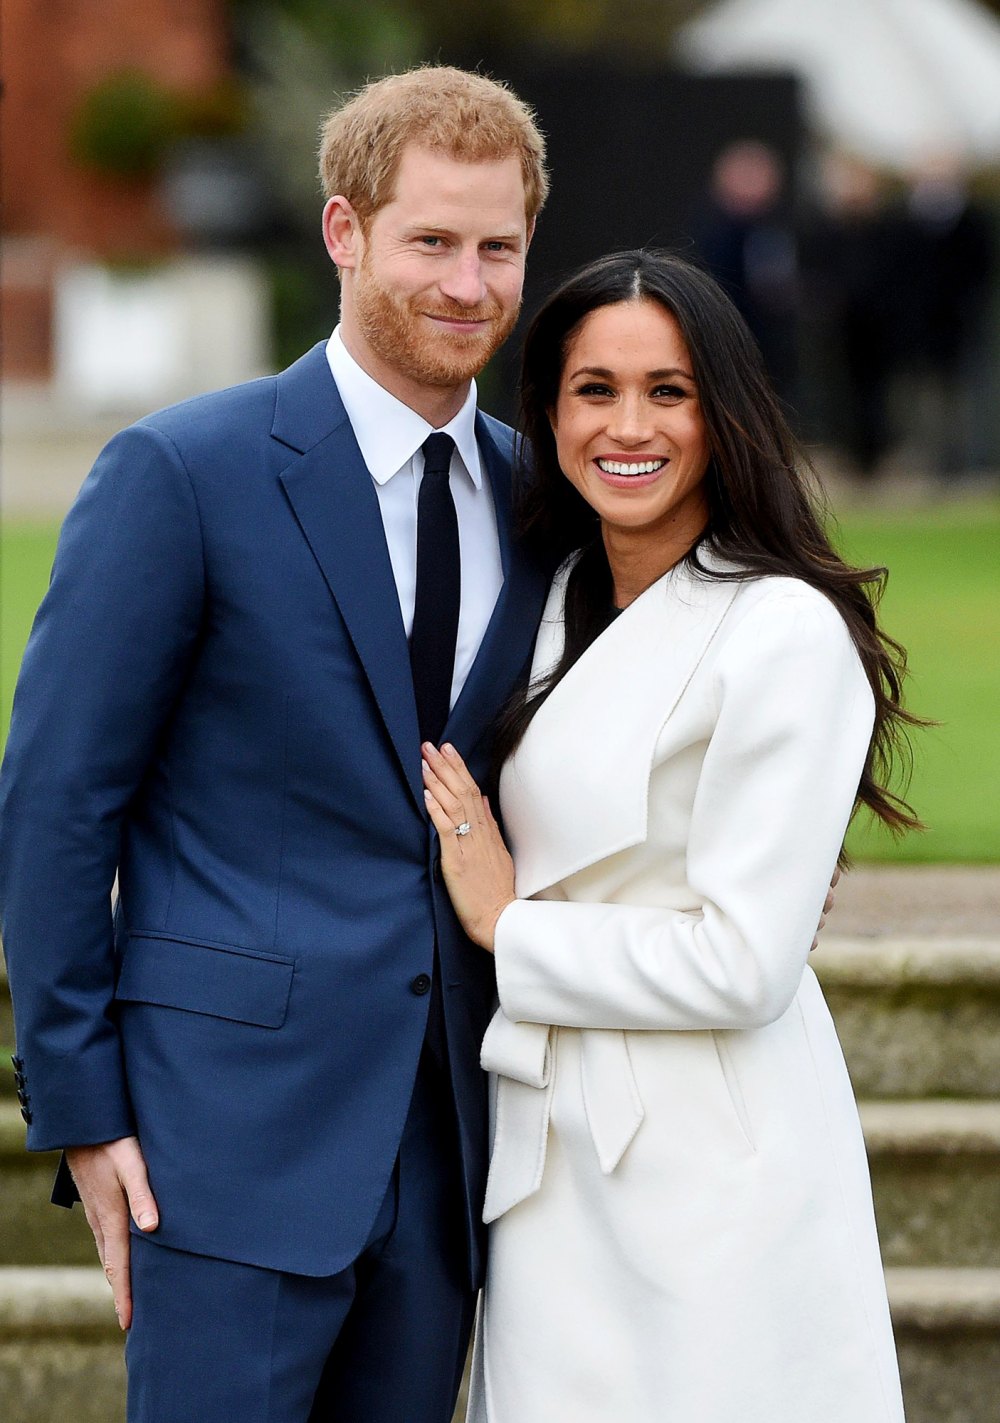 Where Do Prince Harry and Meghan Markle Live The Globetrotting Sussexes Have Planted Roots In Several Countries 116